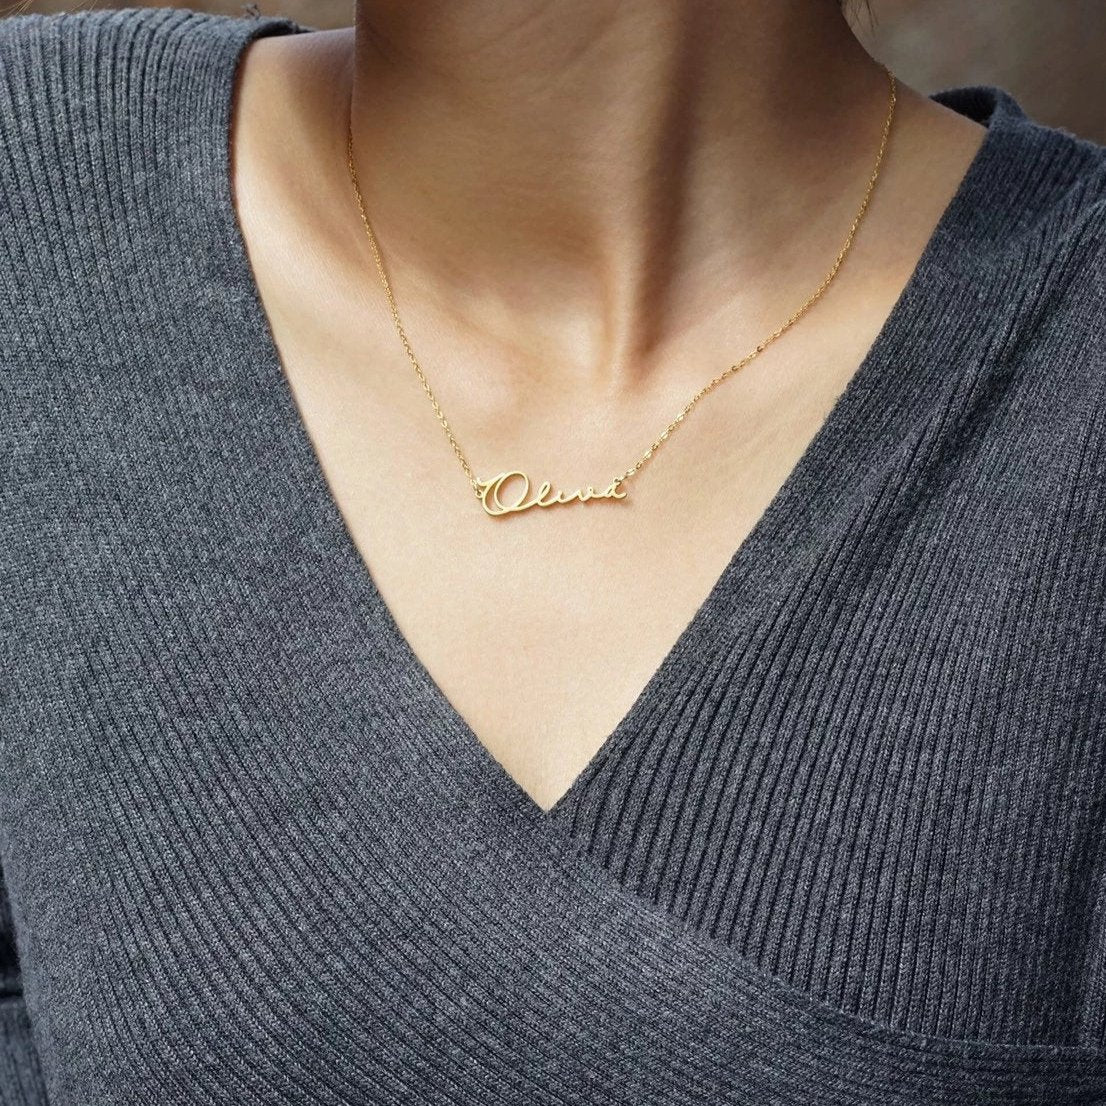 Name Necklace Online Shopping